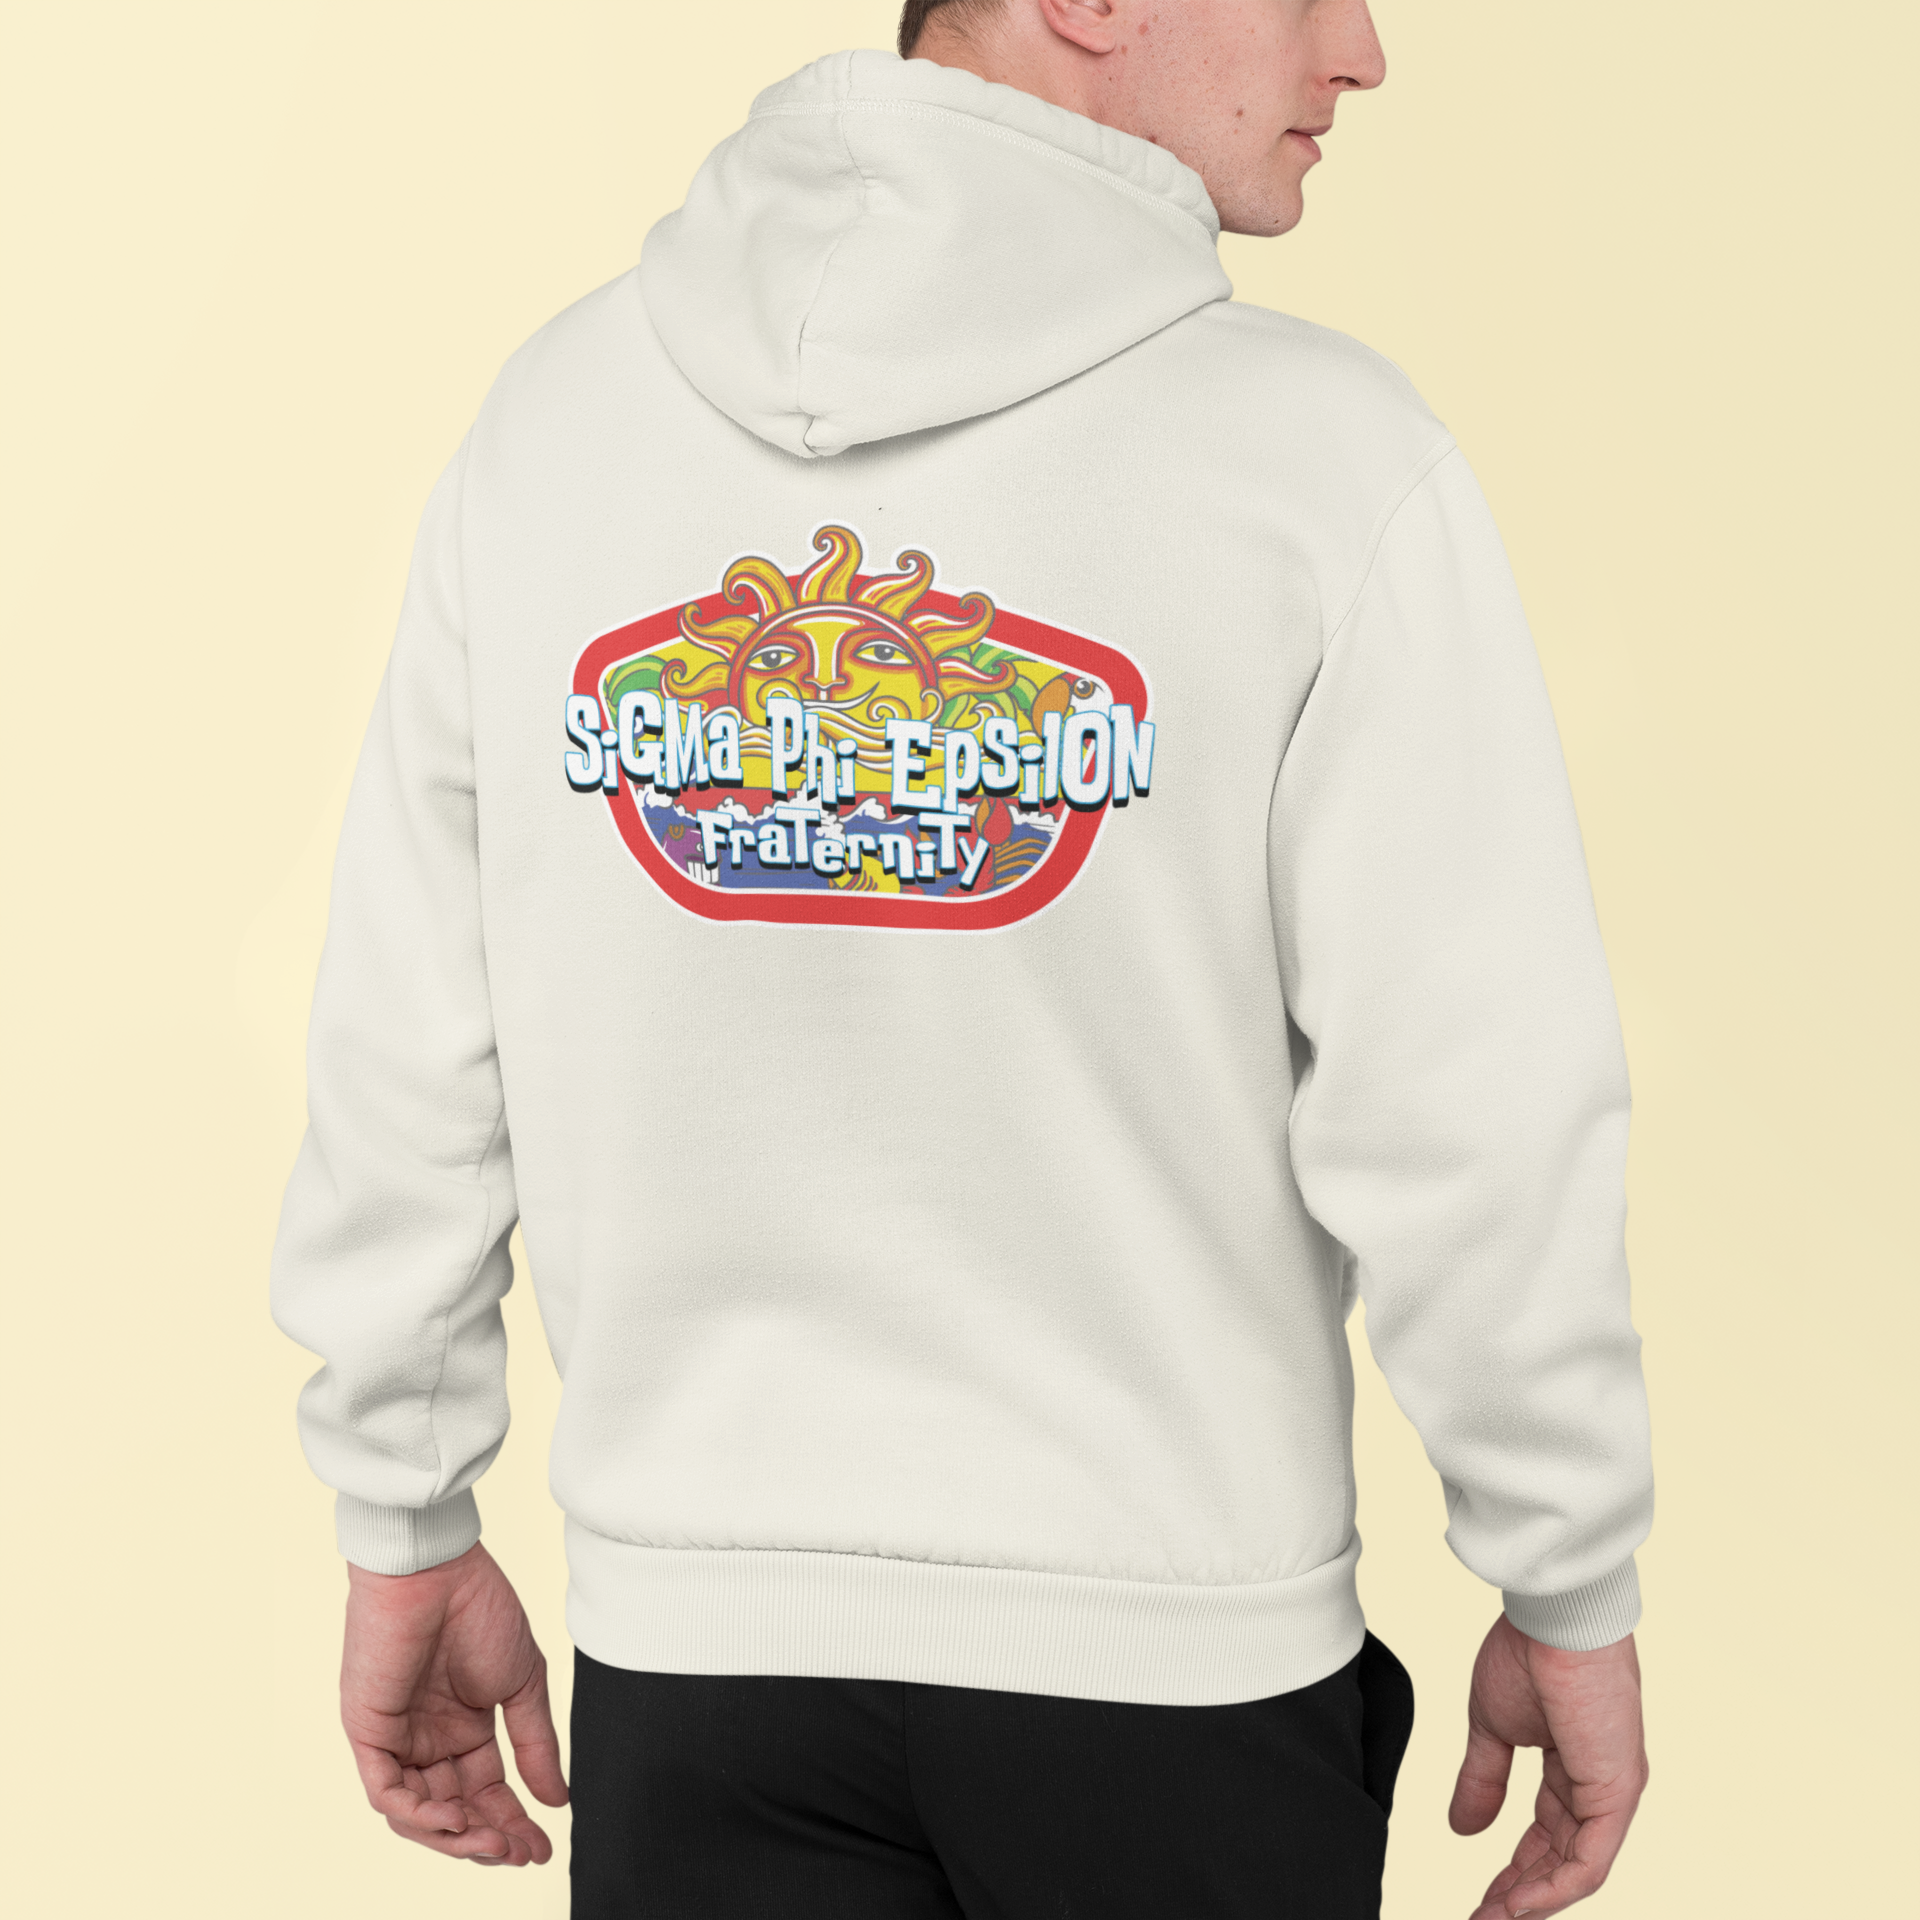 White Sigma Phi Epsilon Graphic Hoodie | Summer Sol | SigEp Fraternity Clothes and Merchandise model 